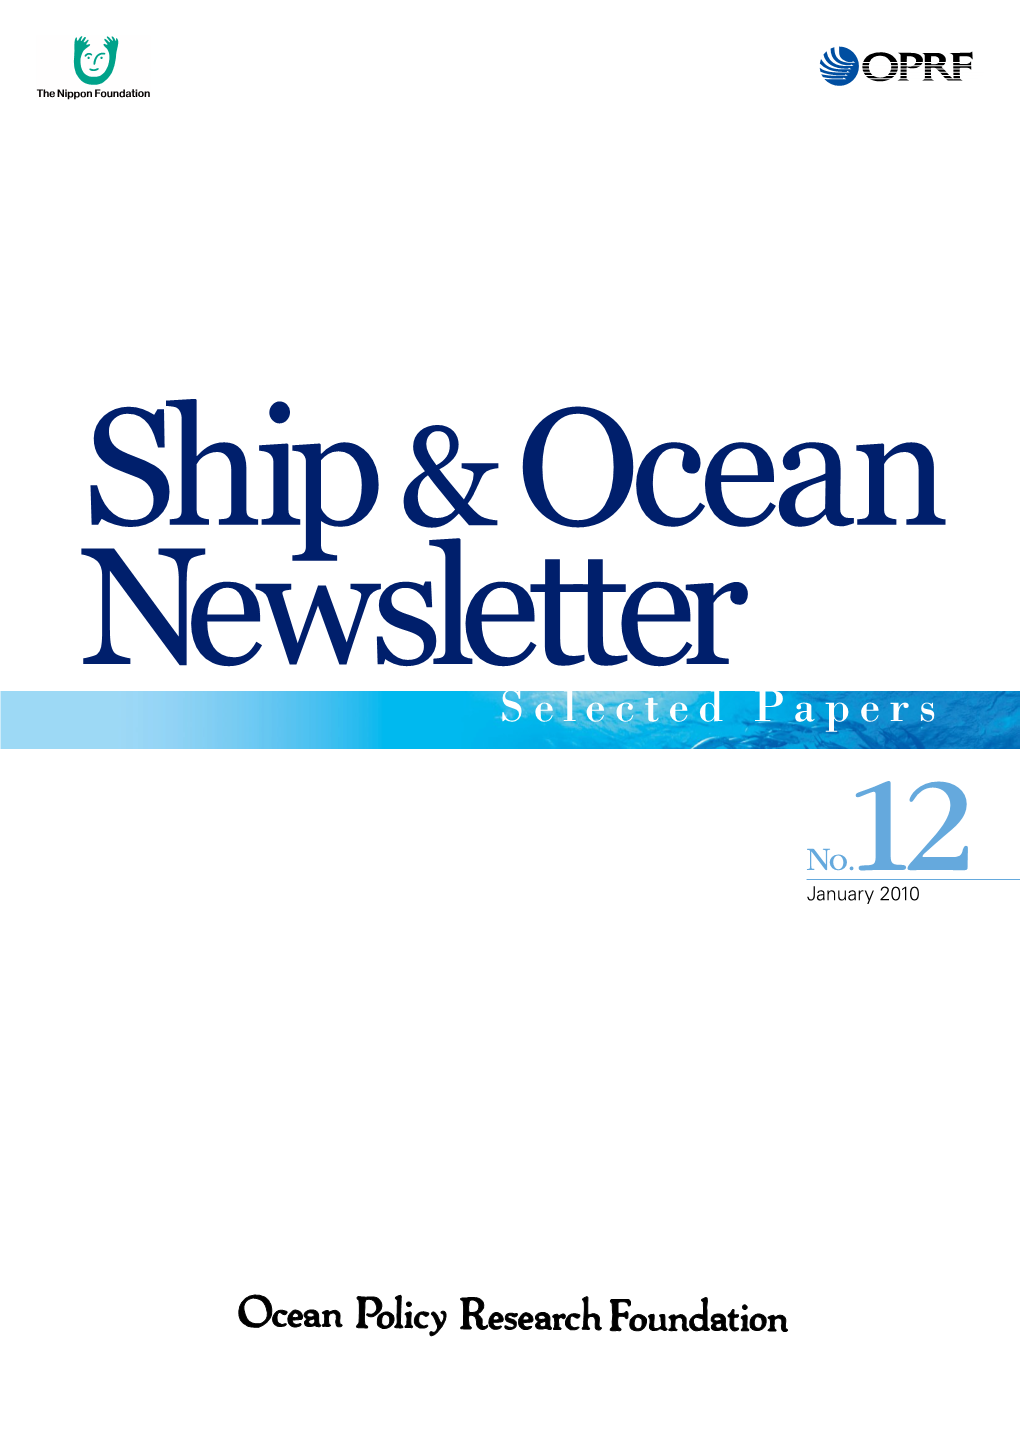 Ship & Ocean Newsletter Selected Papers No. 12